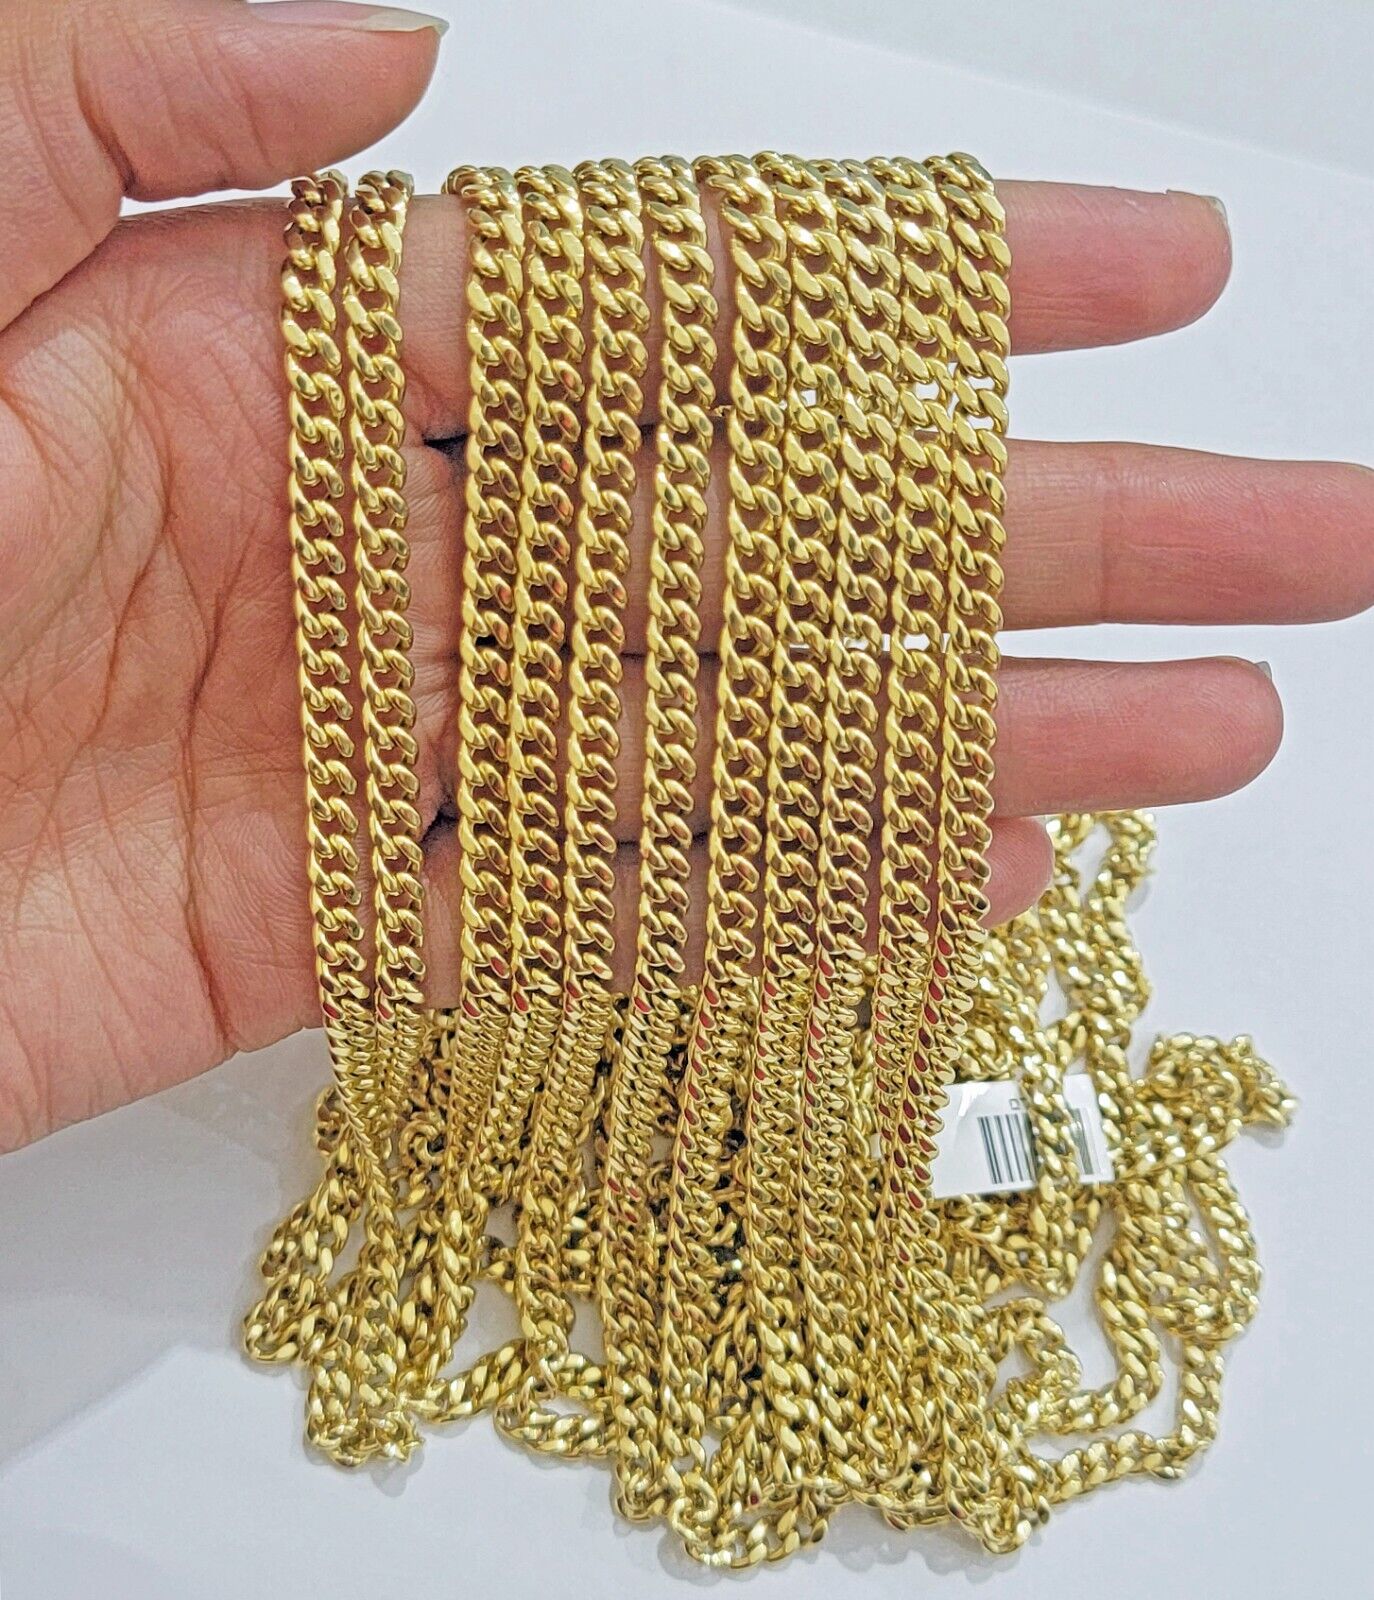 Real 10k Gold chain Necklace Miami Cuban Link 5mm 16